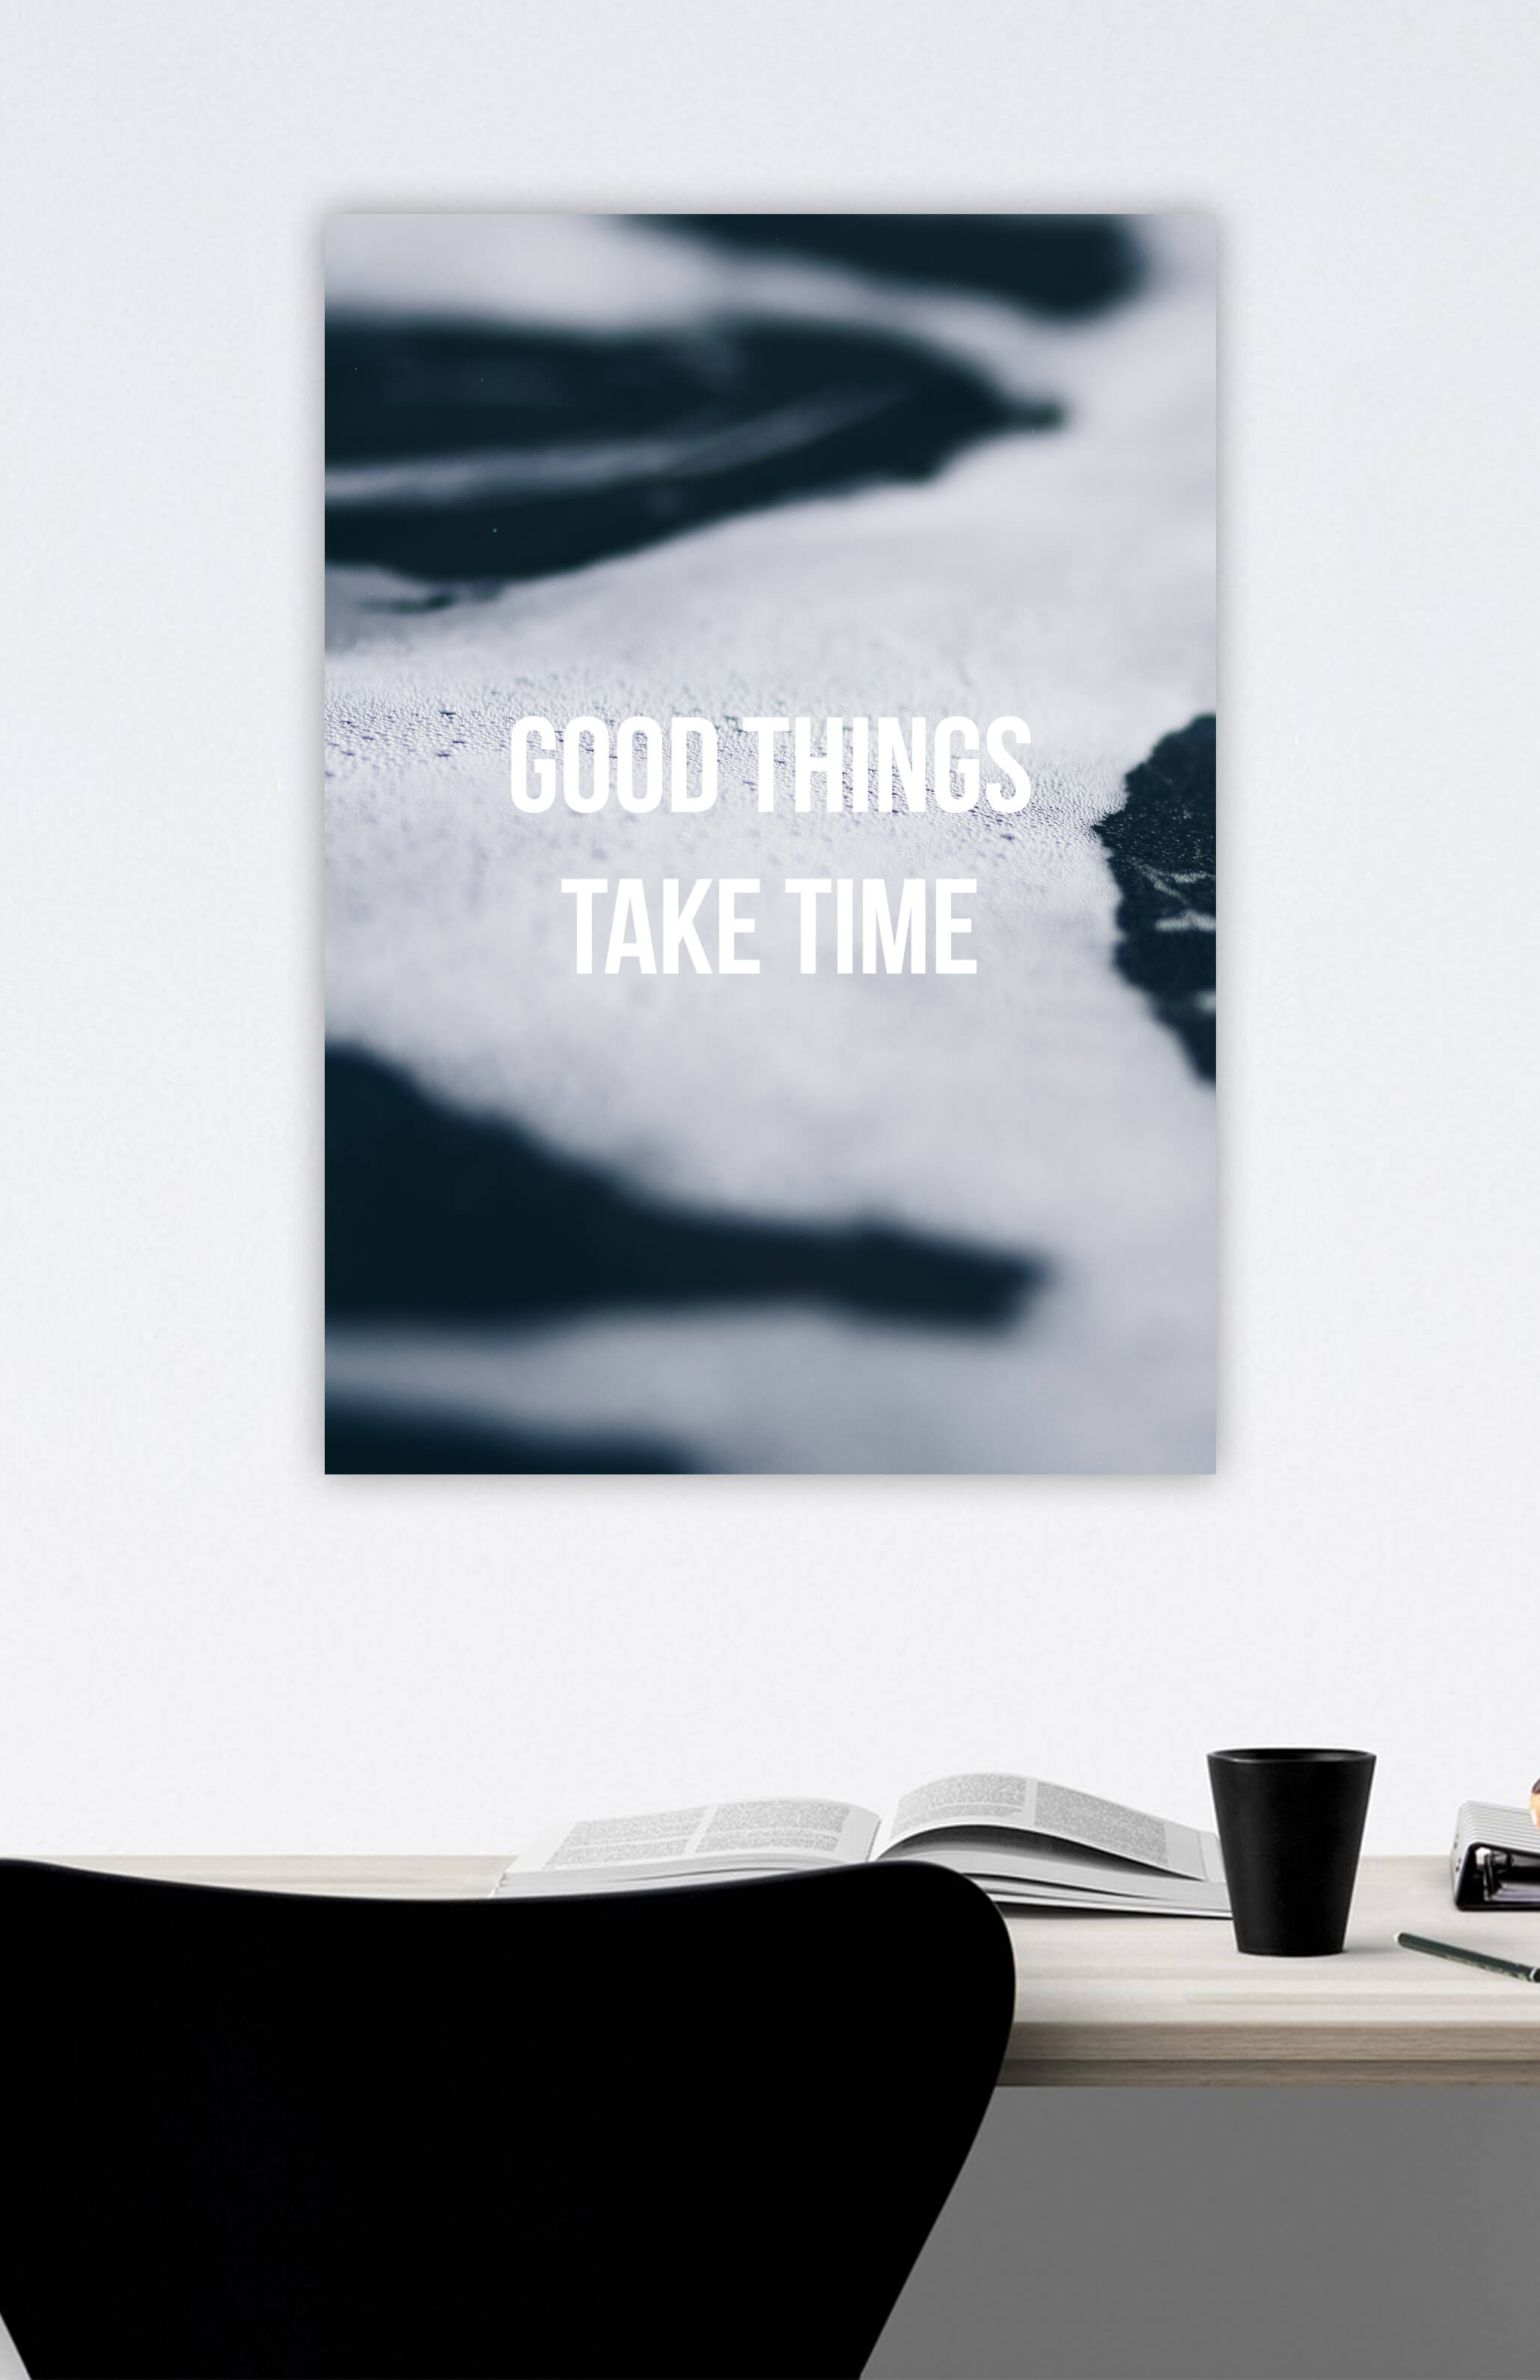 V3 Apparel womens Good Things Take Time, Motivational posters, mens inspirational wall artwork and empowering poster quote designs for office, home gym, school, kitchen and living room.